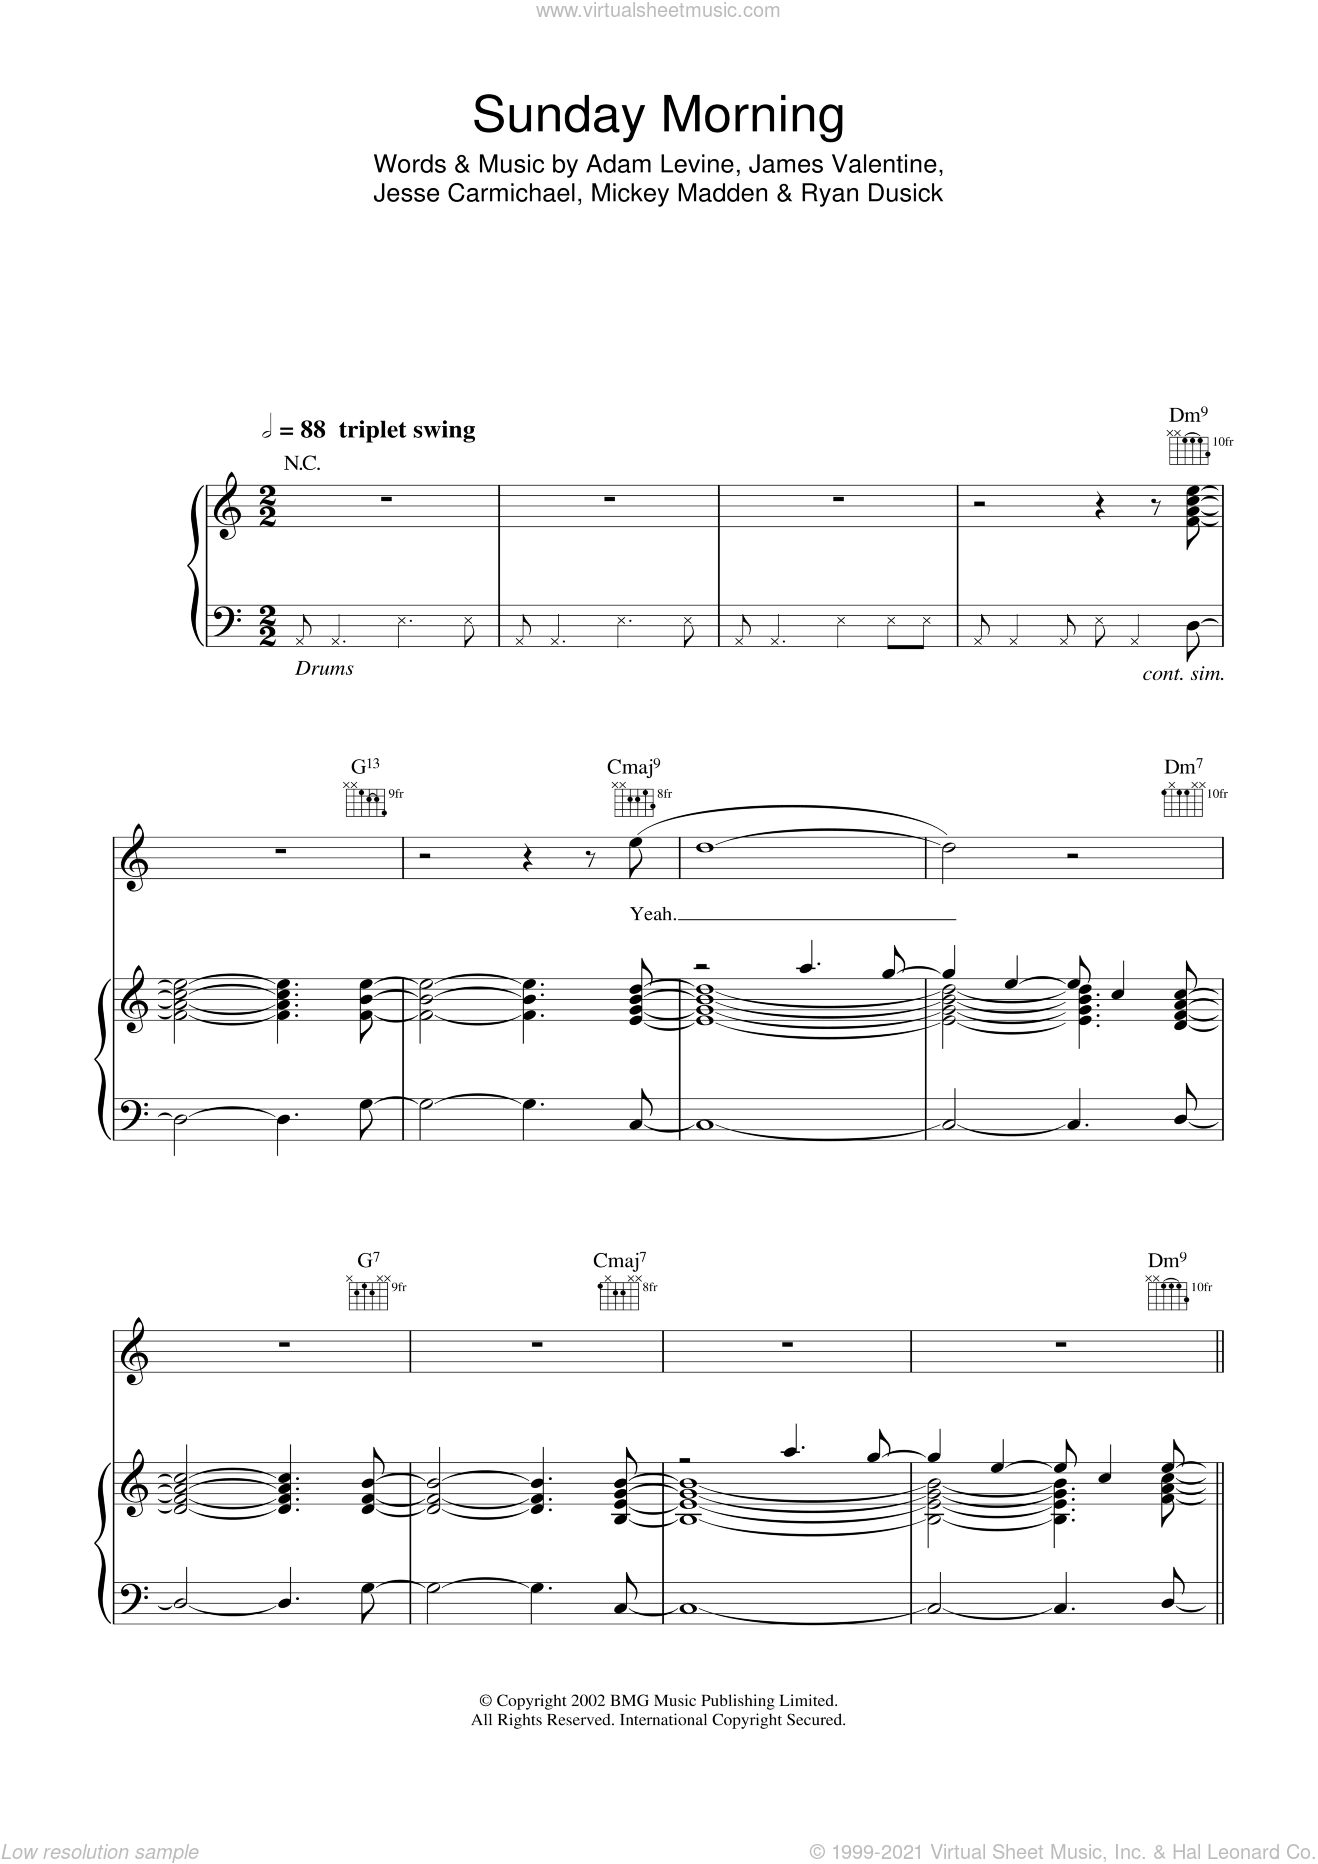 5 - Sunday Morning sheet music for voice, piano or guitar